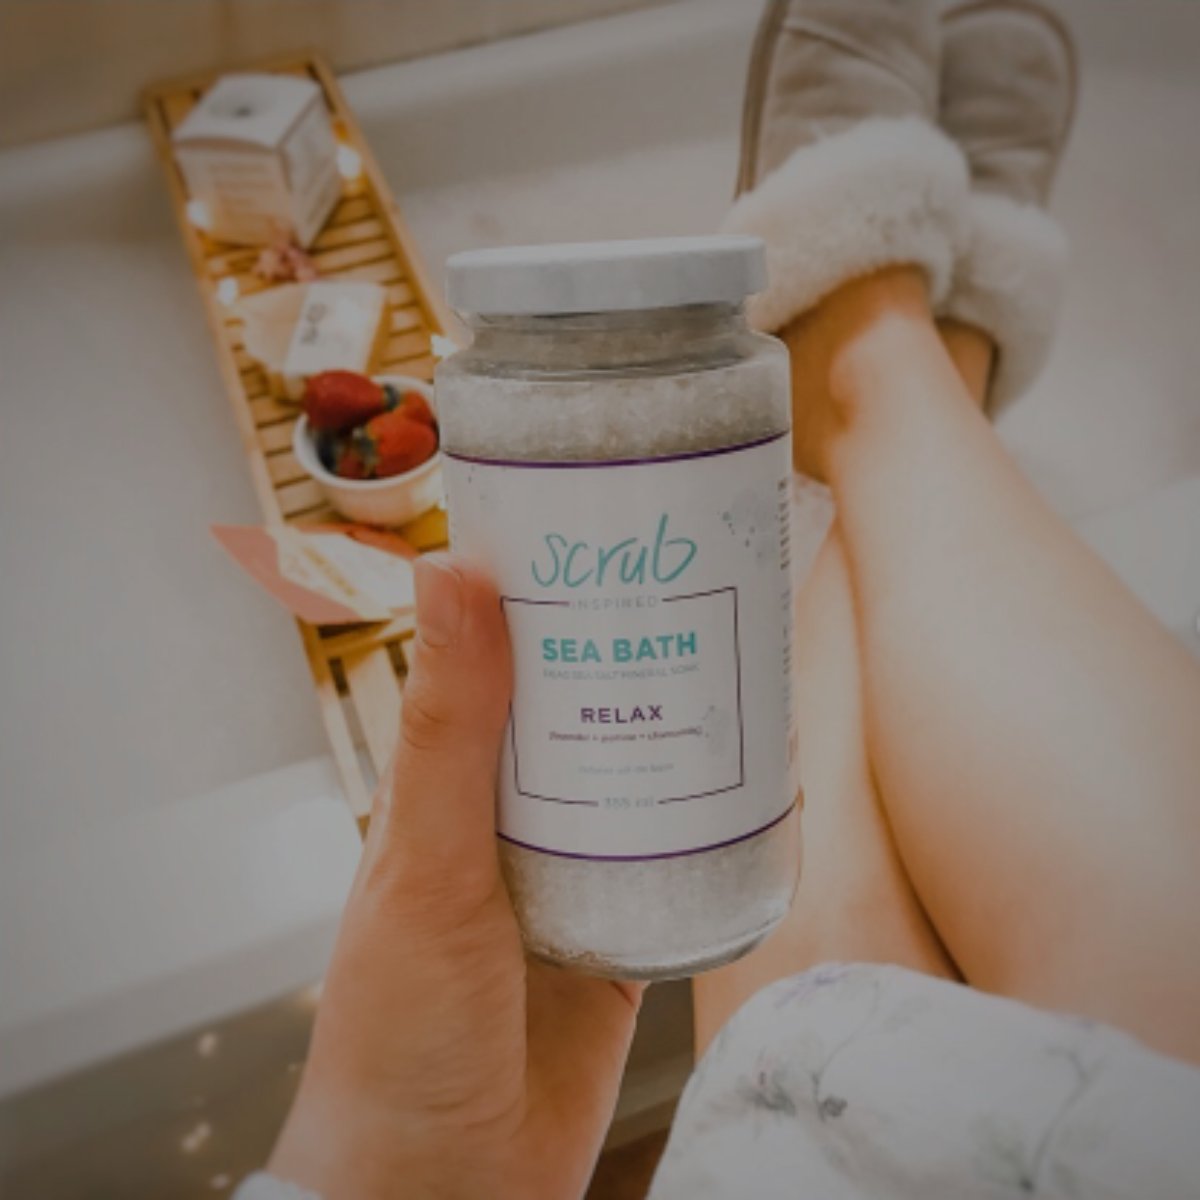 Sea Bath salt soaks. Made with epsom salt, dead sea salt, epsom salt, and relaxing or refreshing essential oil blends. Scrub Inspired is made in Cape Breton, Nova Scotia, Canada. All natural skin care products for the bath